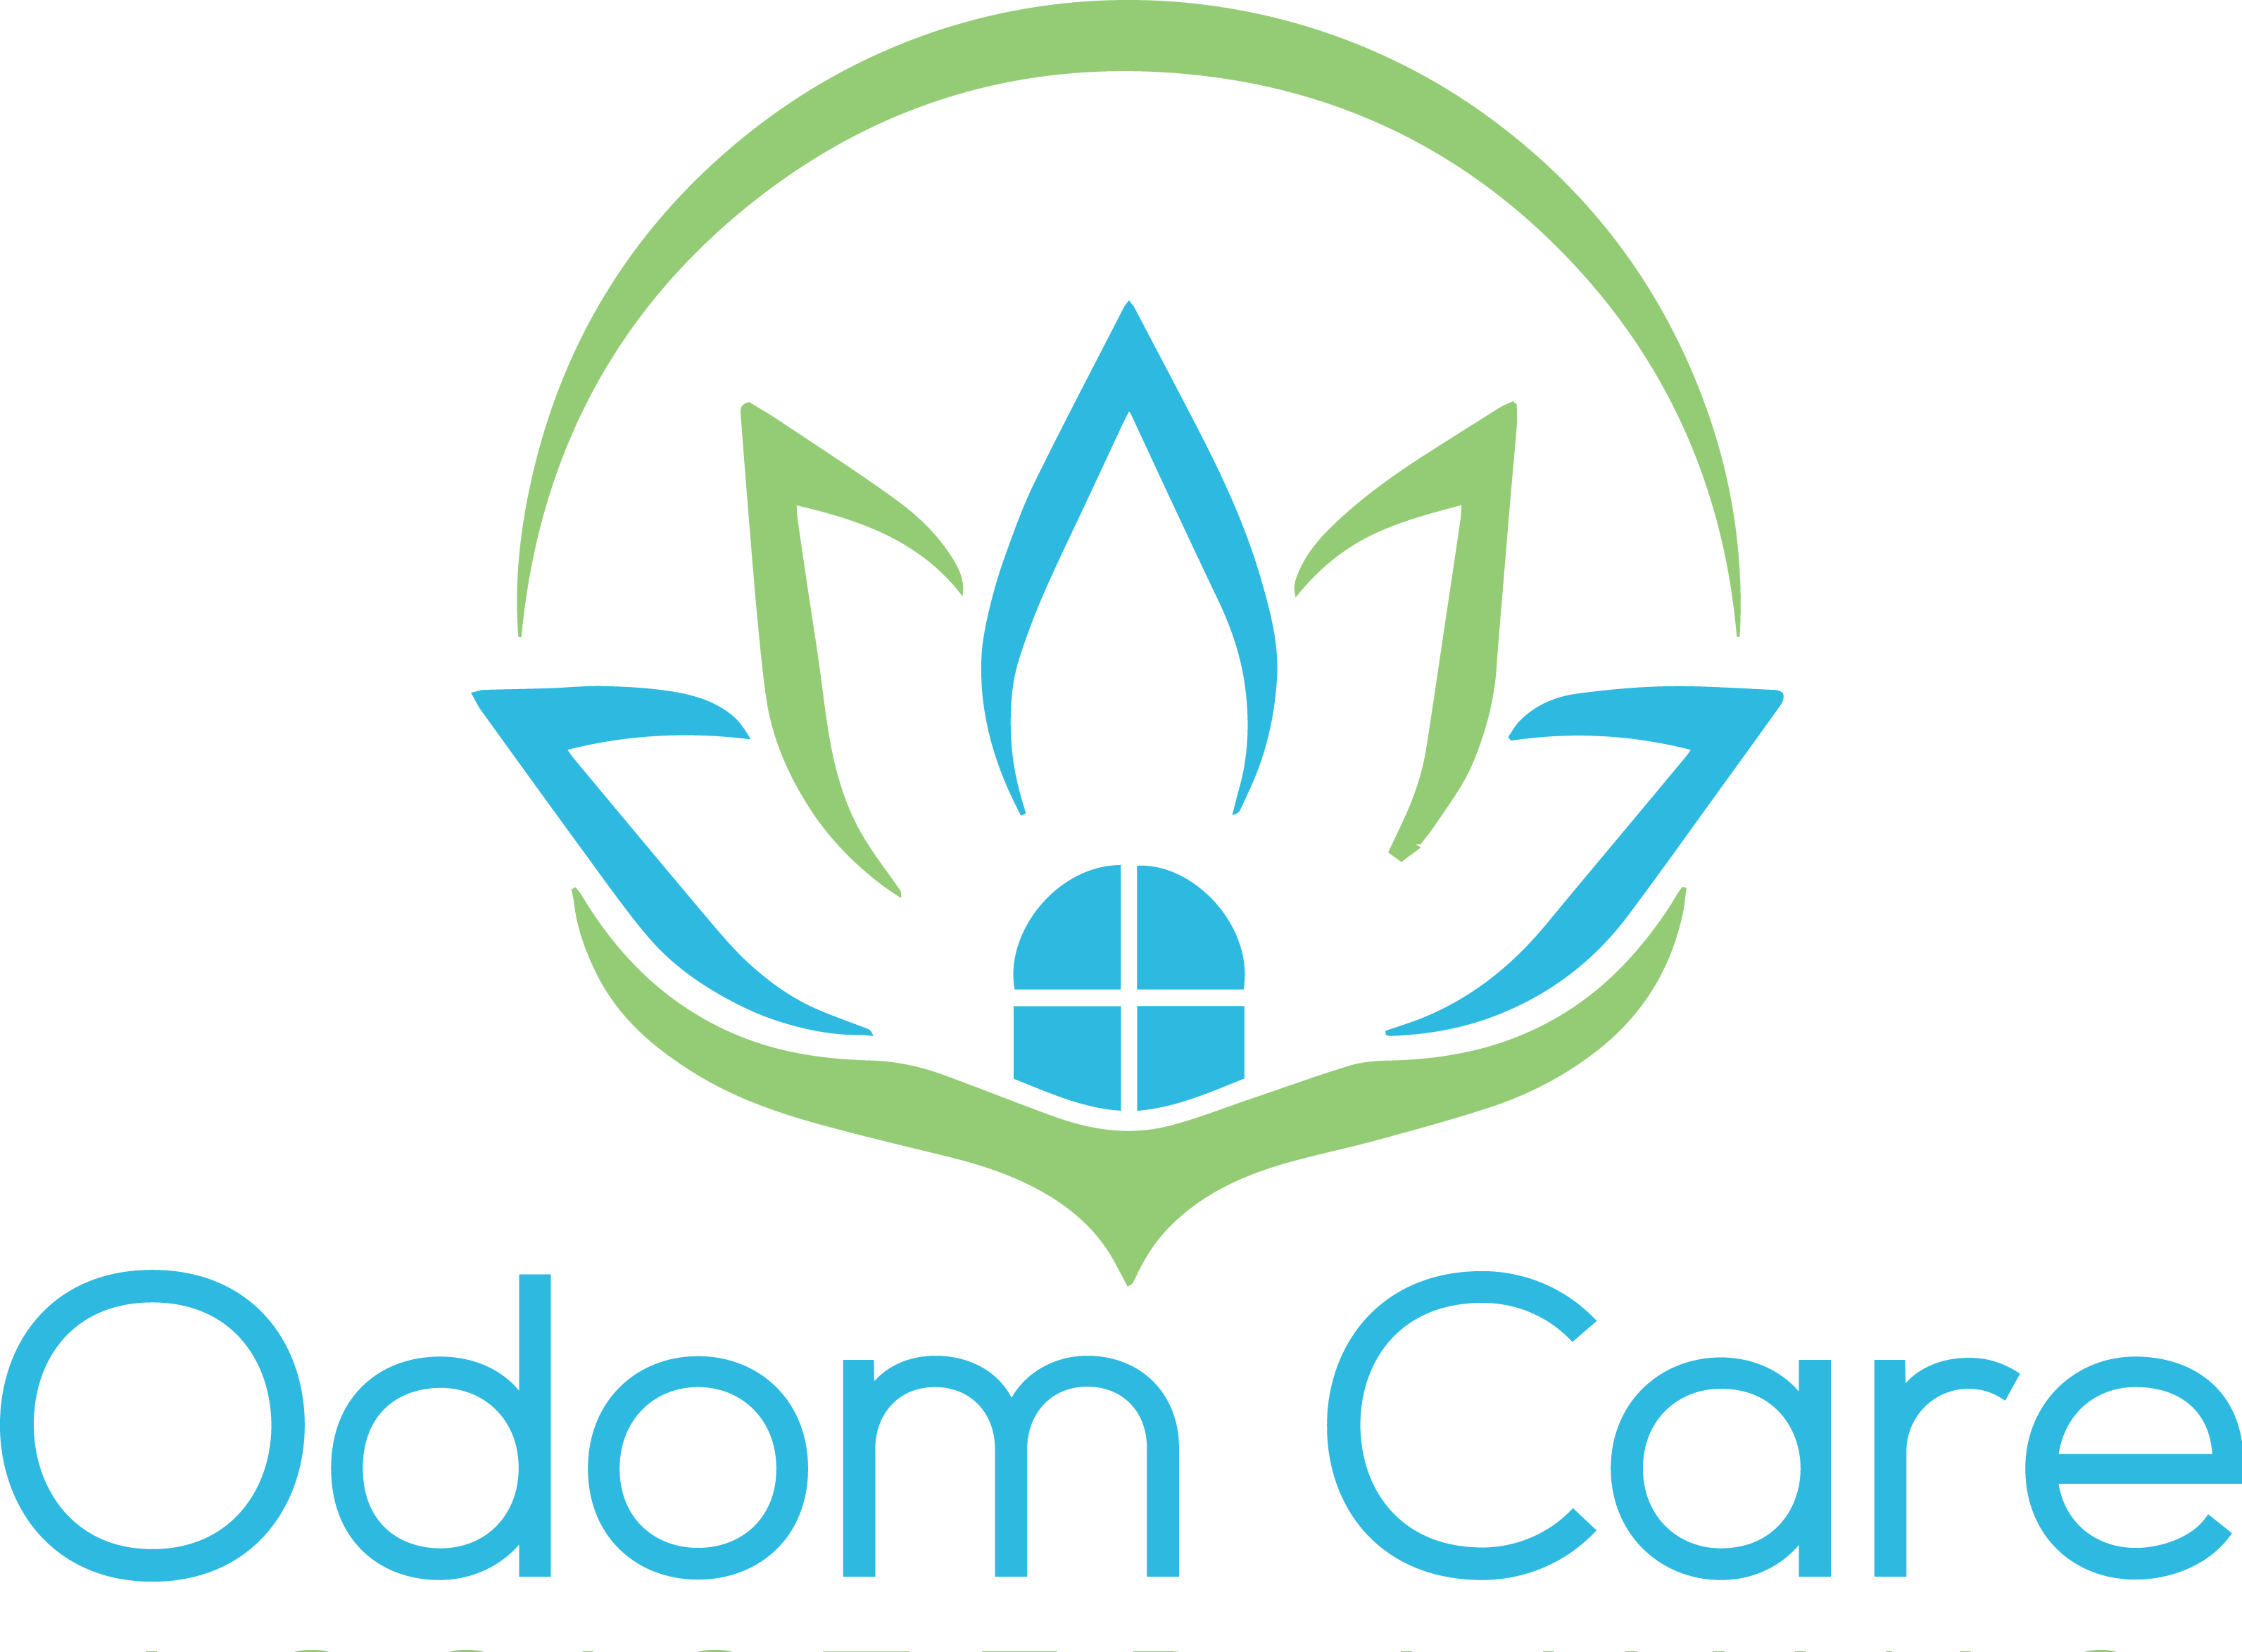 The logo for "Odom Care" features a stylized lotus flower composed of layered leaves in shades of green and blue, with a house depicted in the center of the flower, symbolizing shelter and care. The design conveys a sense of tranquility and support, aligned with the values of a care-oriented organization.